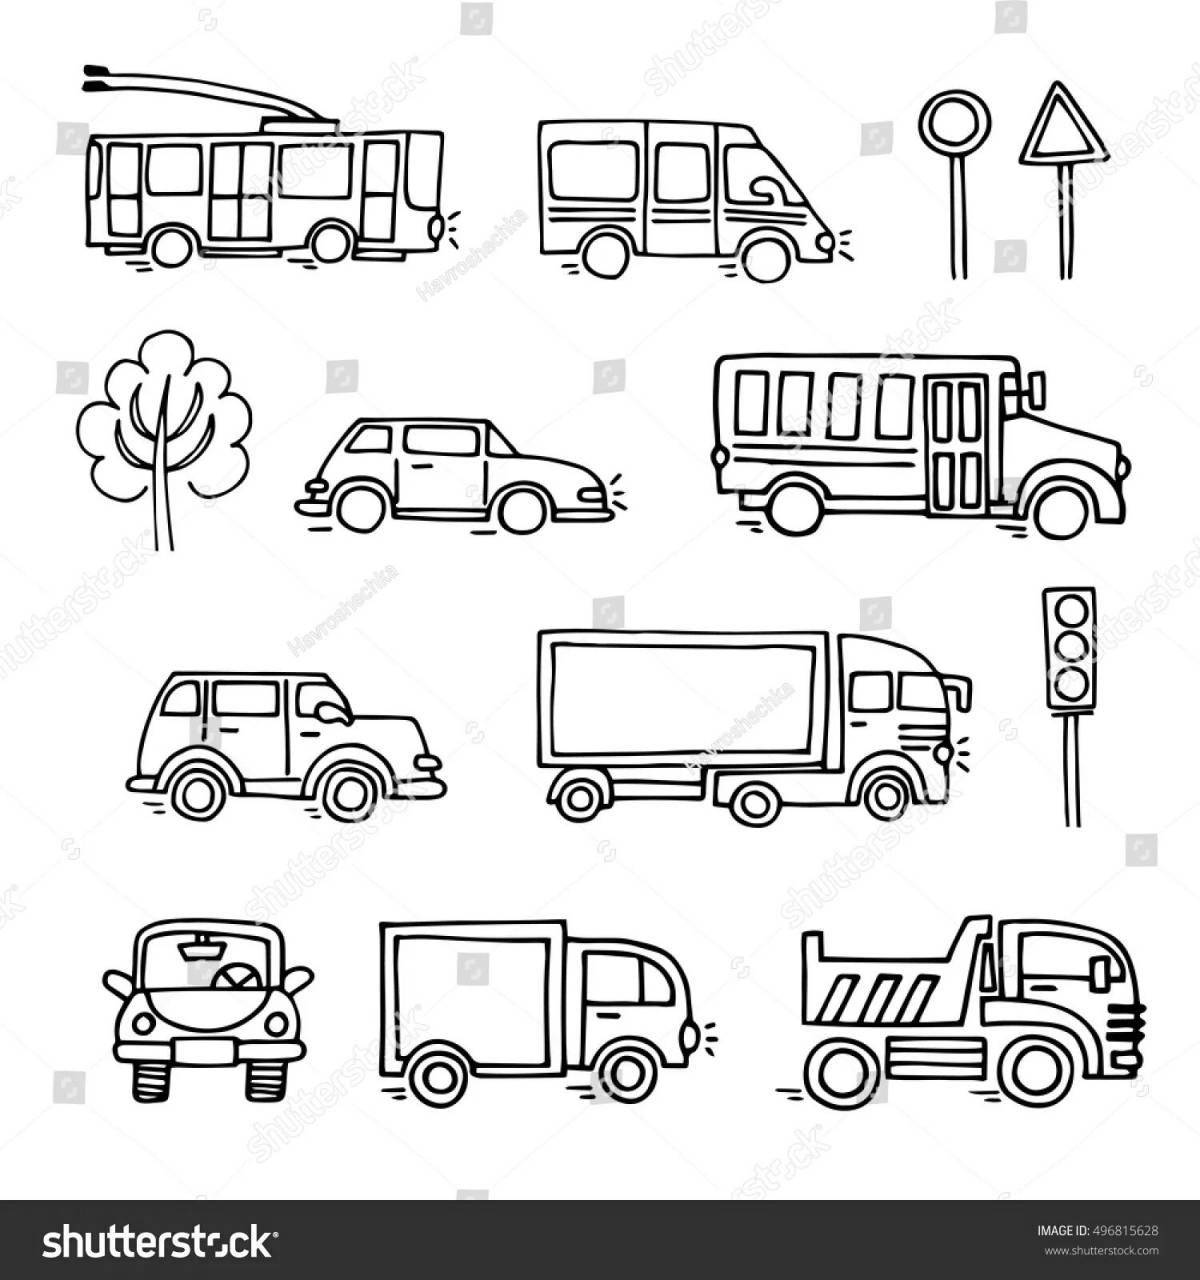 Coloring page nice city cars